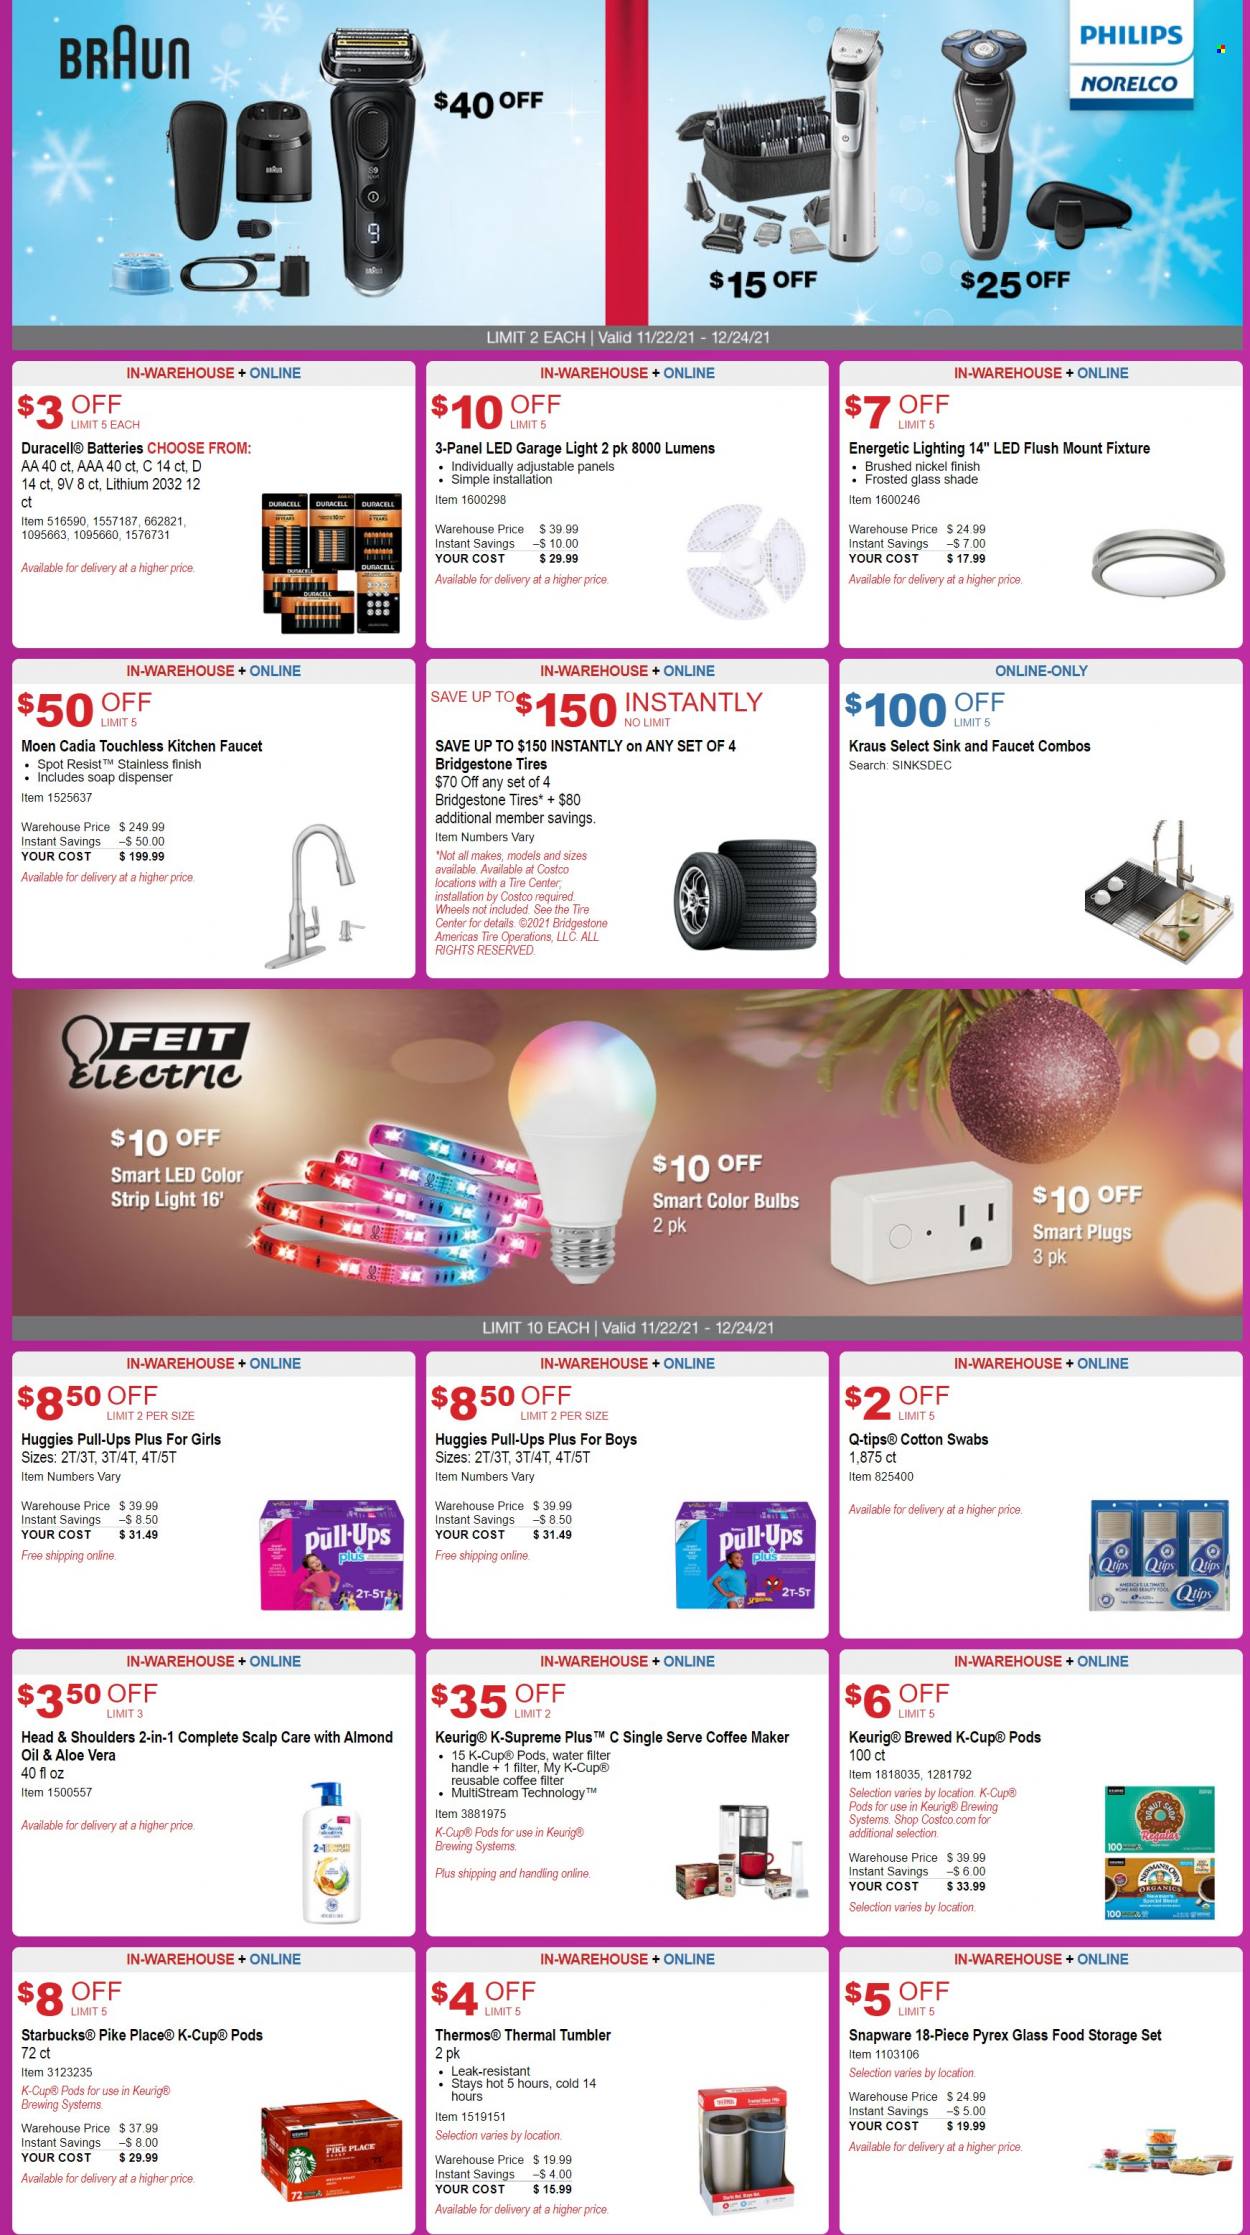 thumbnail - Costco Flyer - 11/22/2021 - 12/24/2021 - Sales products - faucet, sink, Philips, oil, Starbucks, coffee capsules, K-Cups, Keurig, Huggies, Head & Shoulders, soap dispenser, dispenser, tumbler, Pyrex, storage container set, bulb, Duracell, water filter, Braun, coffee machine, Norelco, lighting, Bridgestone, tires. Page 3.